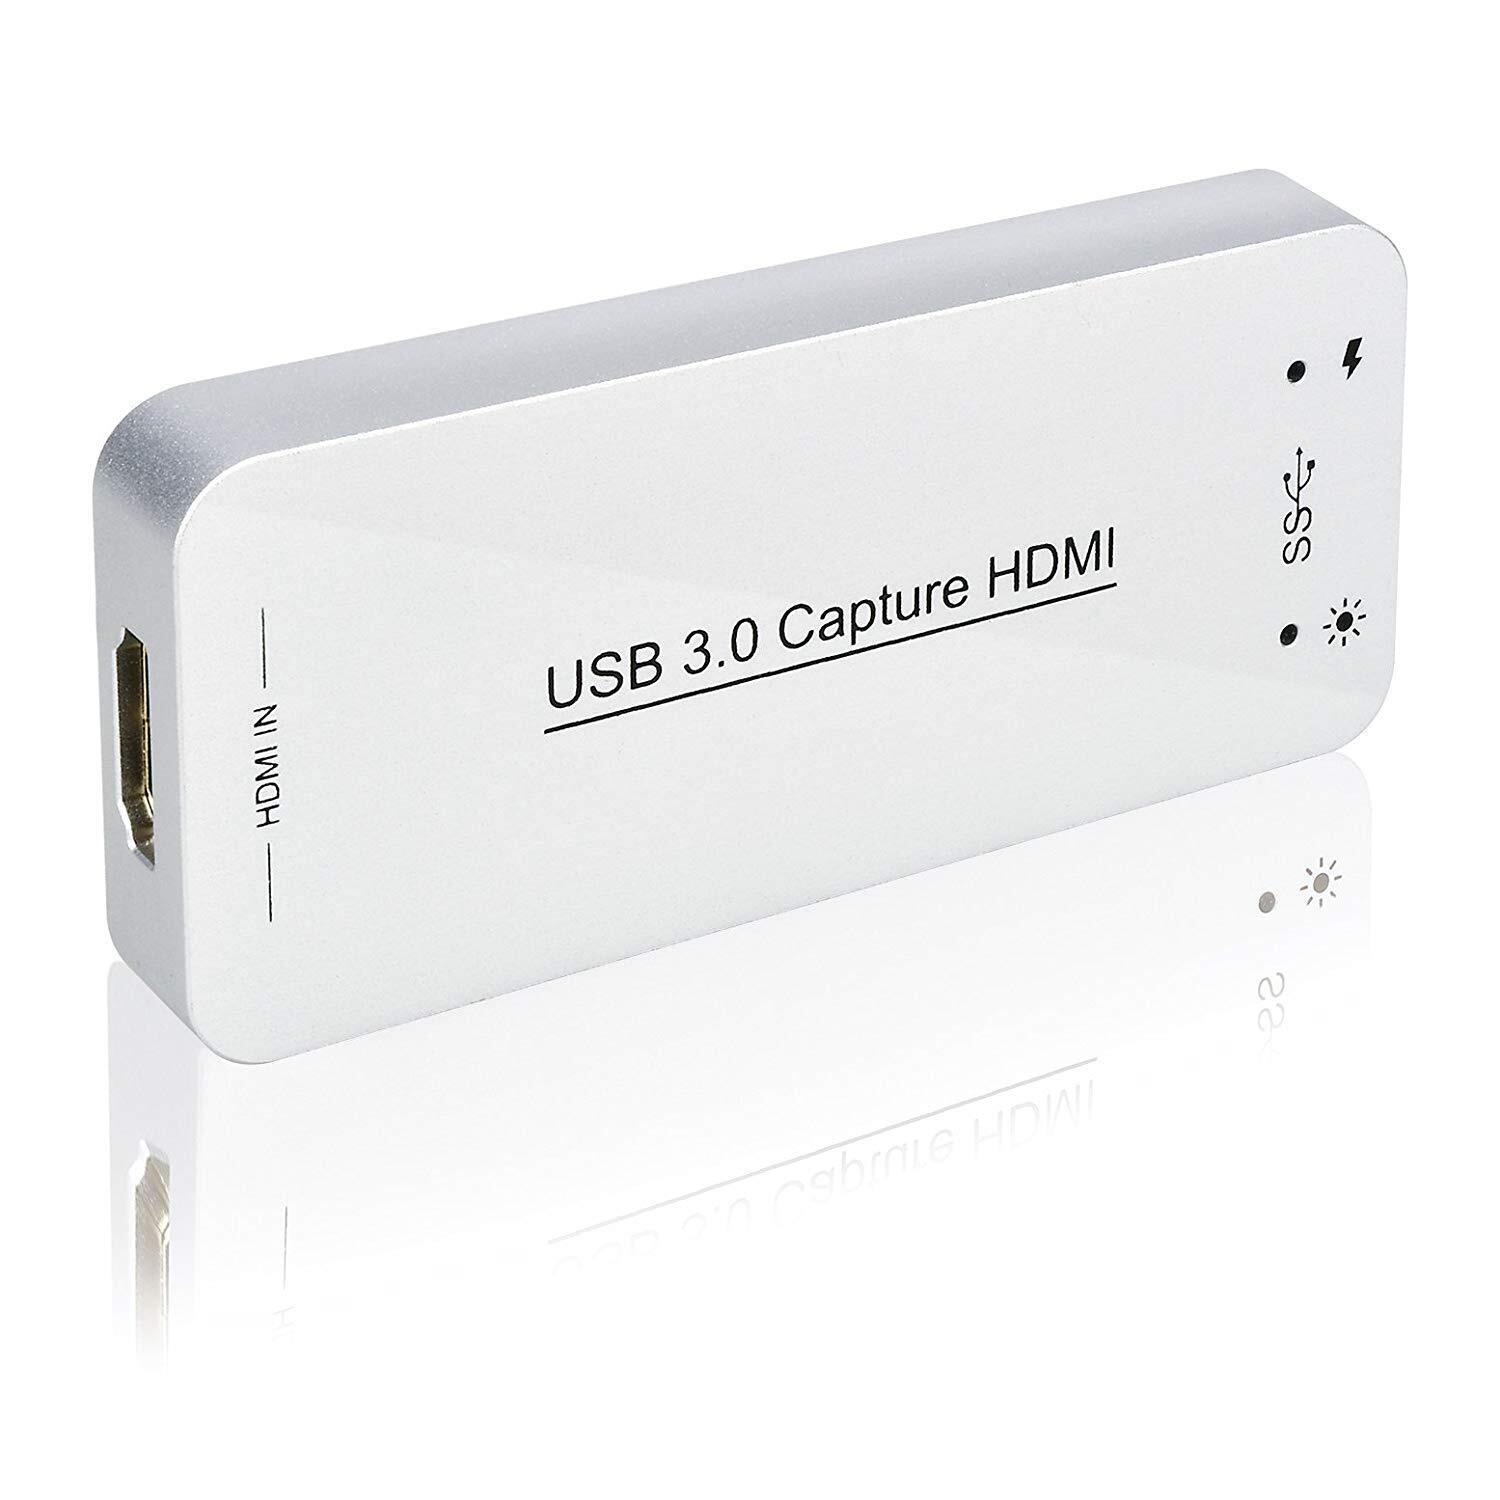 USB Capture HDMI Video Card, Broadcast Live Stream and Record Video Game Grabber